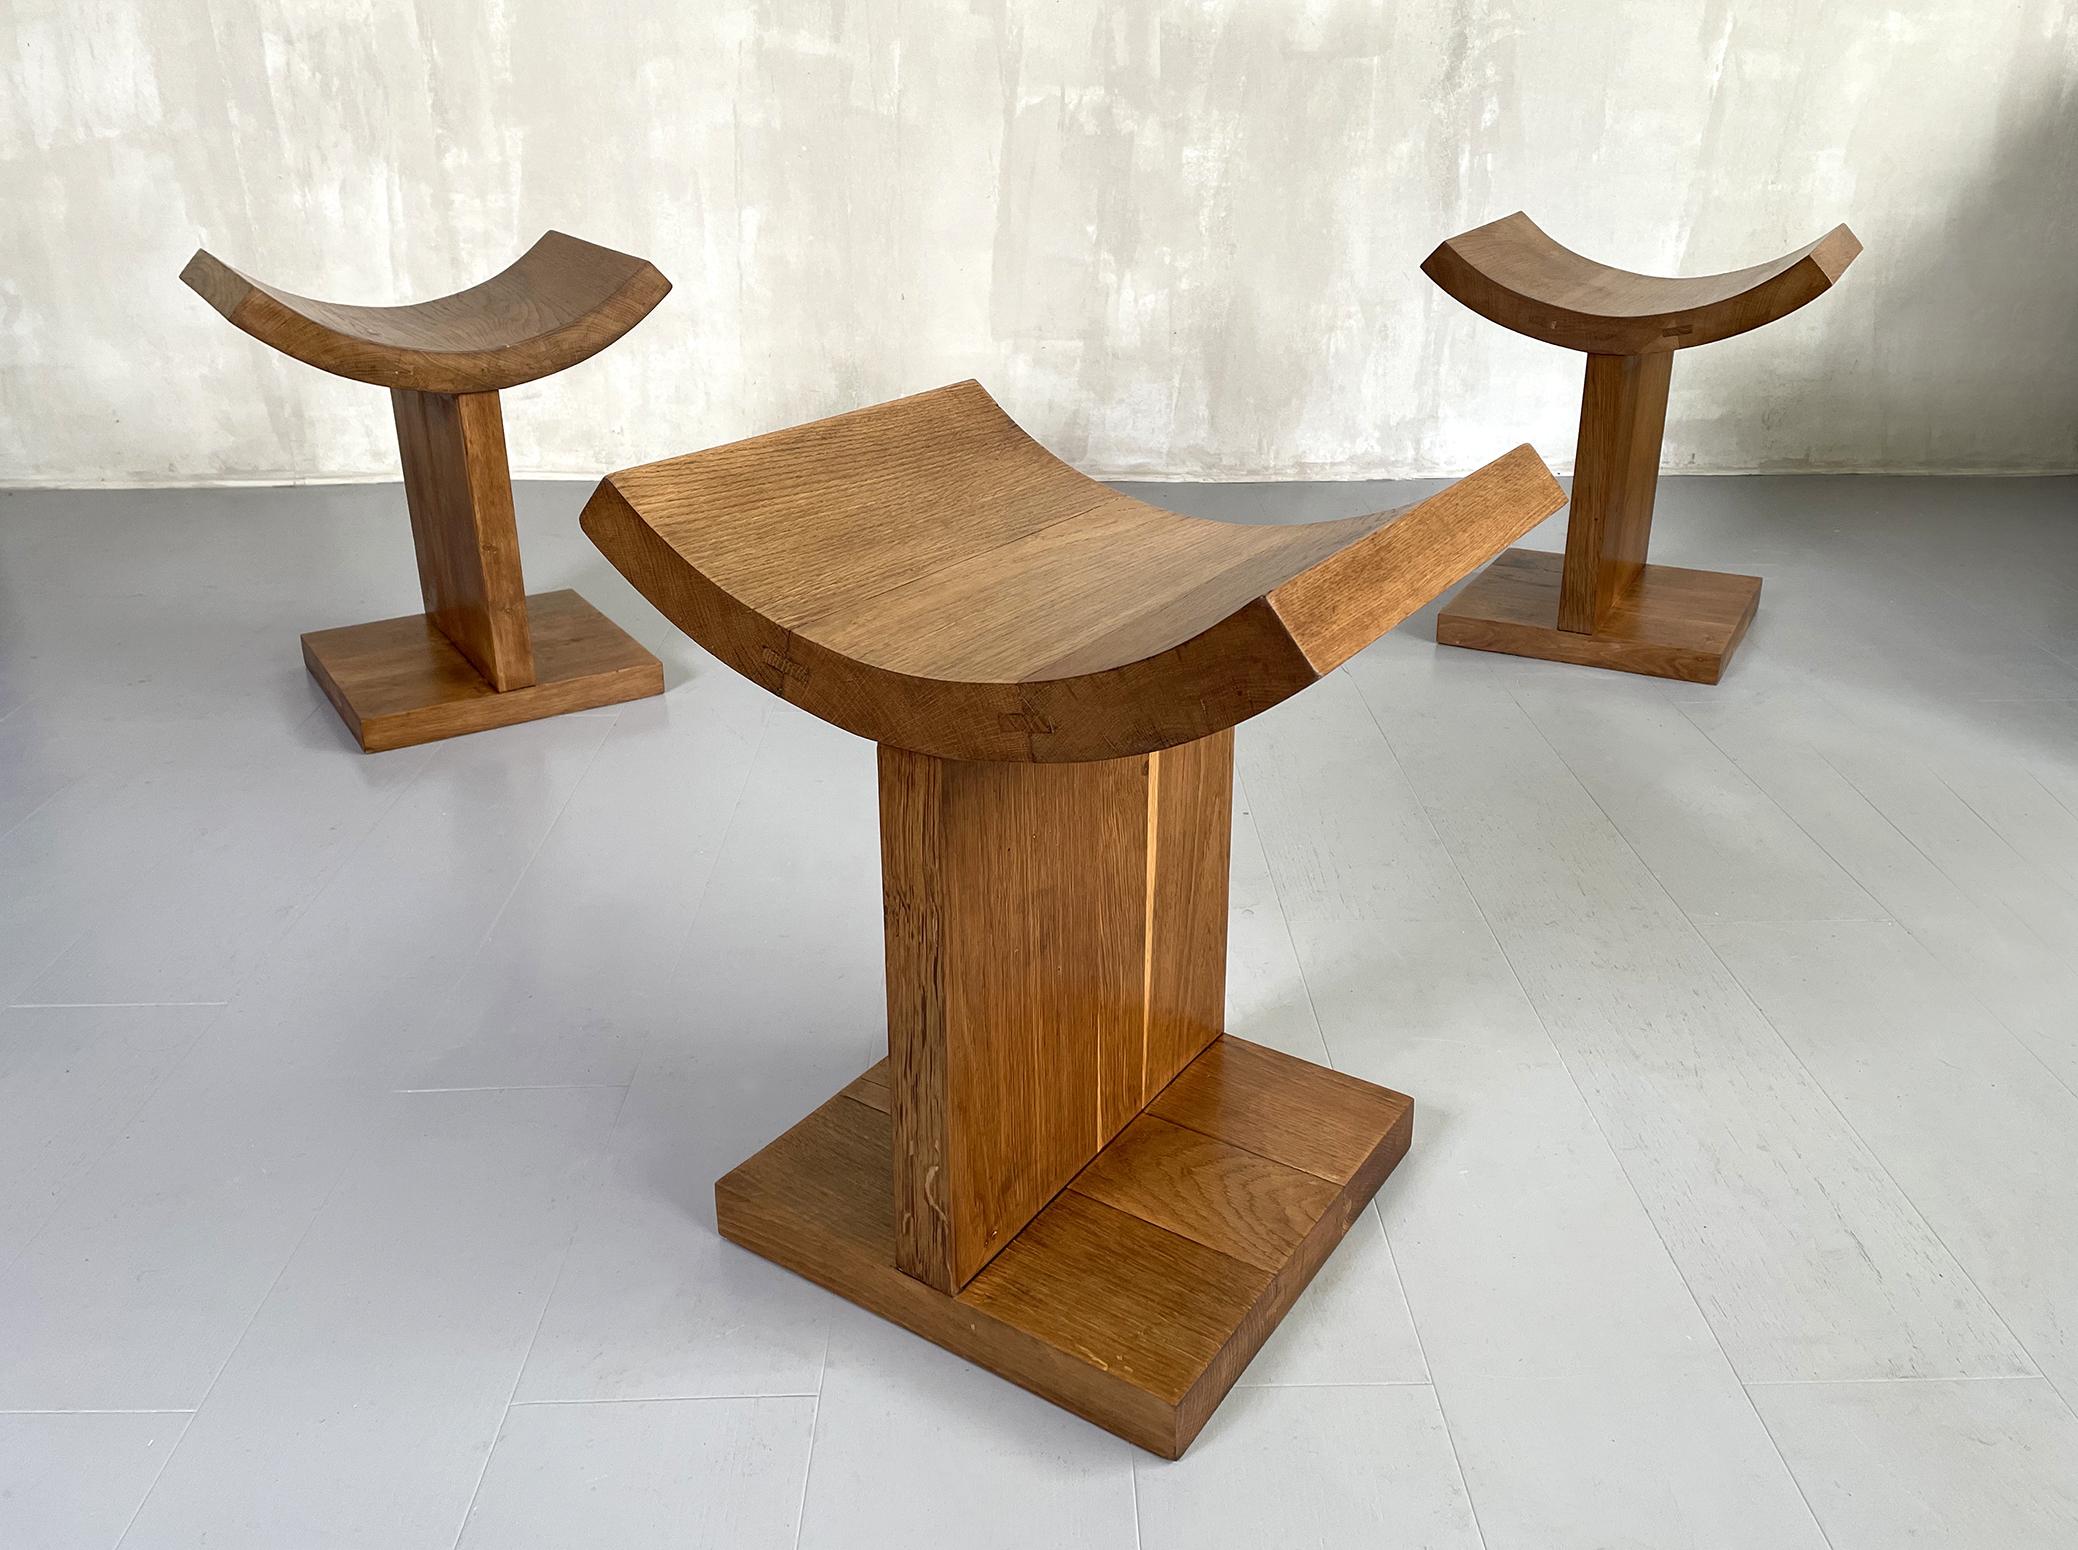 Set of 4 modernist stools in solid oak, France 1950. One example has two trapezoidal legs. The very pure design and the quality of manufacture give these seats a unique presence.
Very good condition.
 